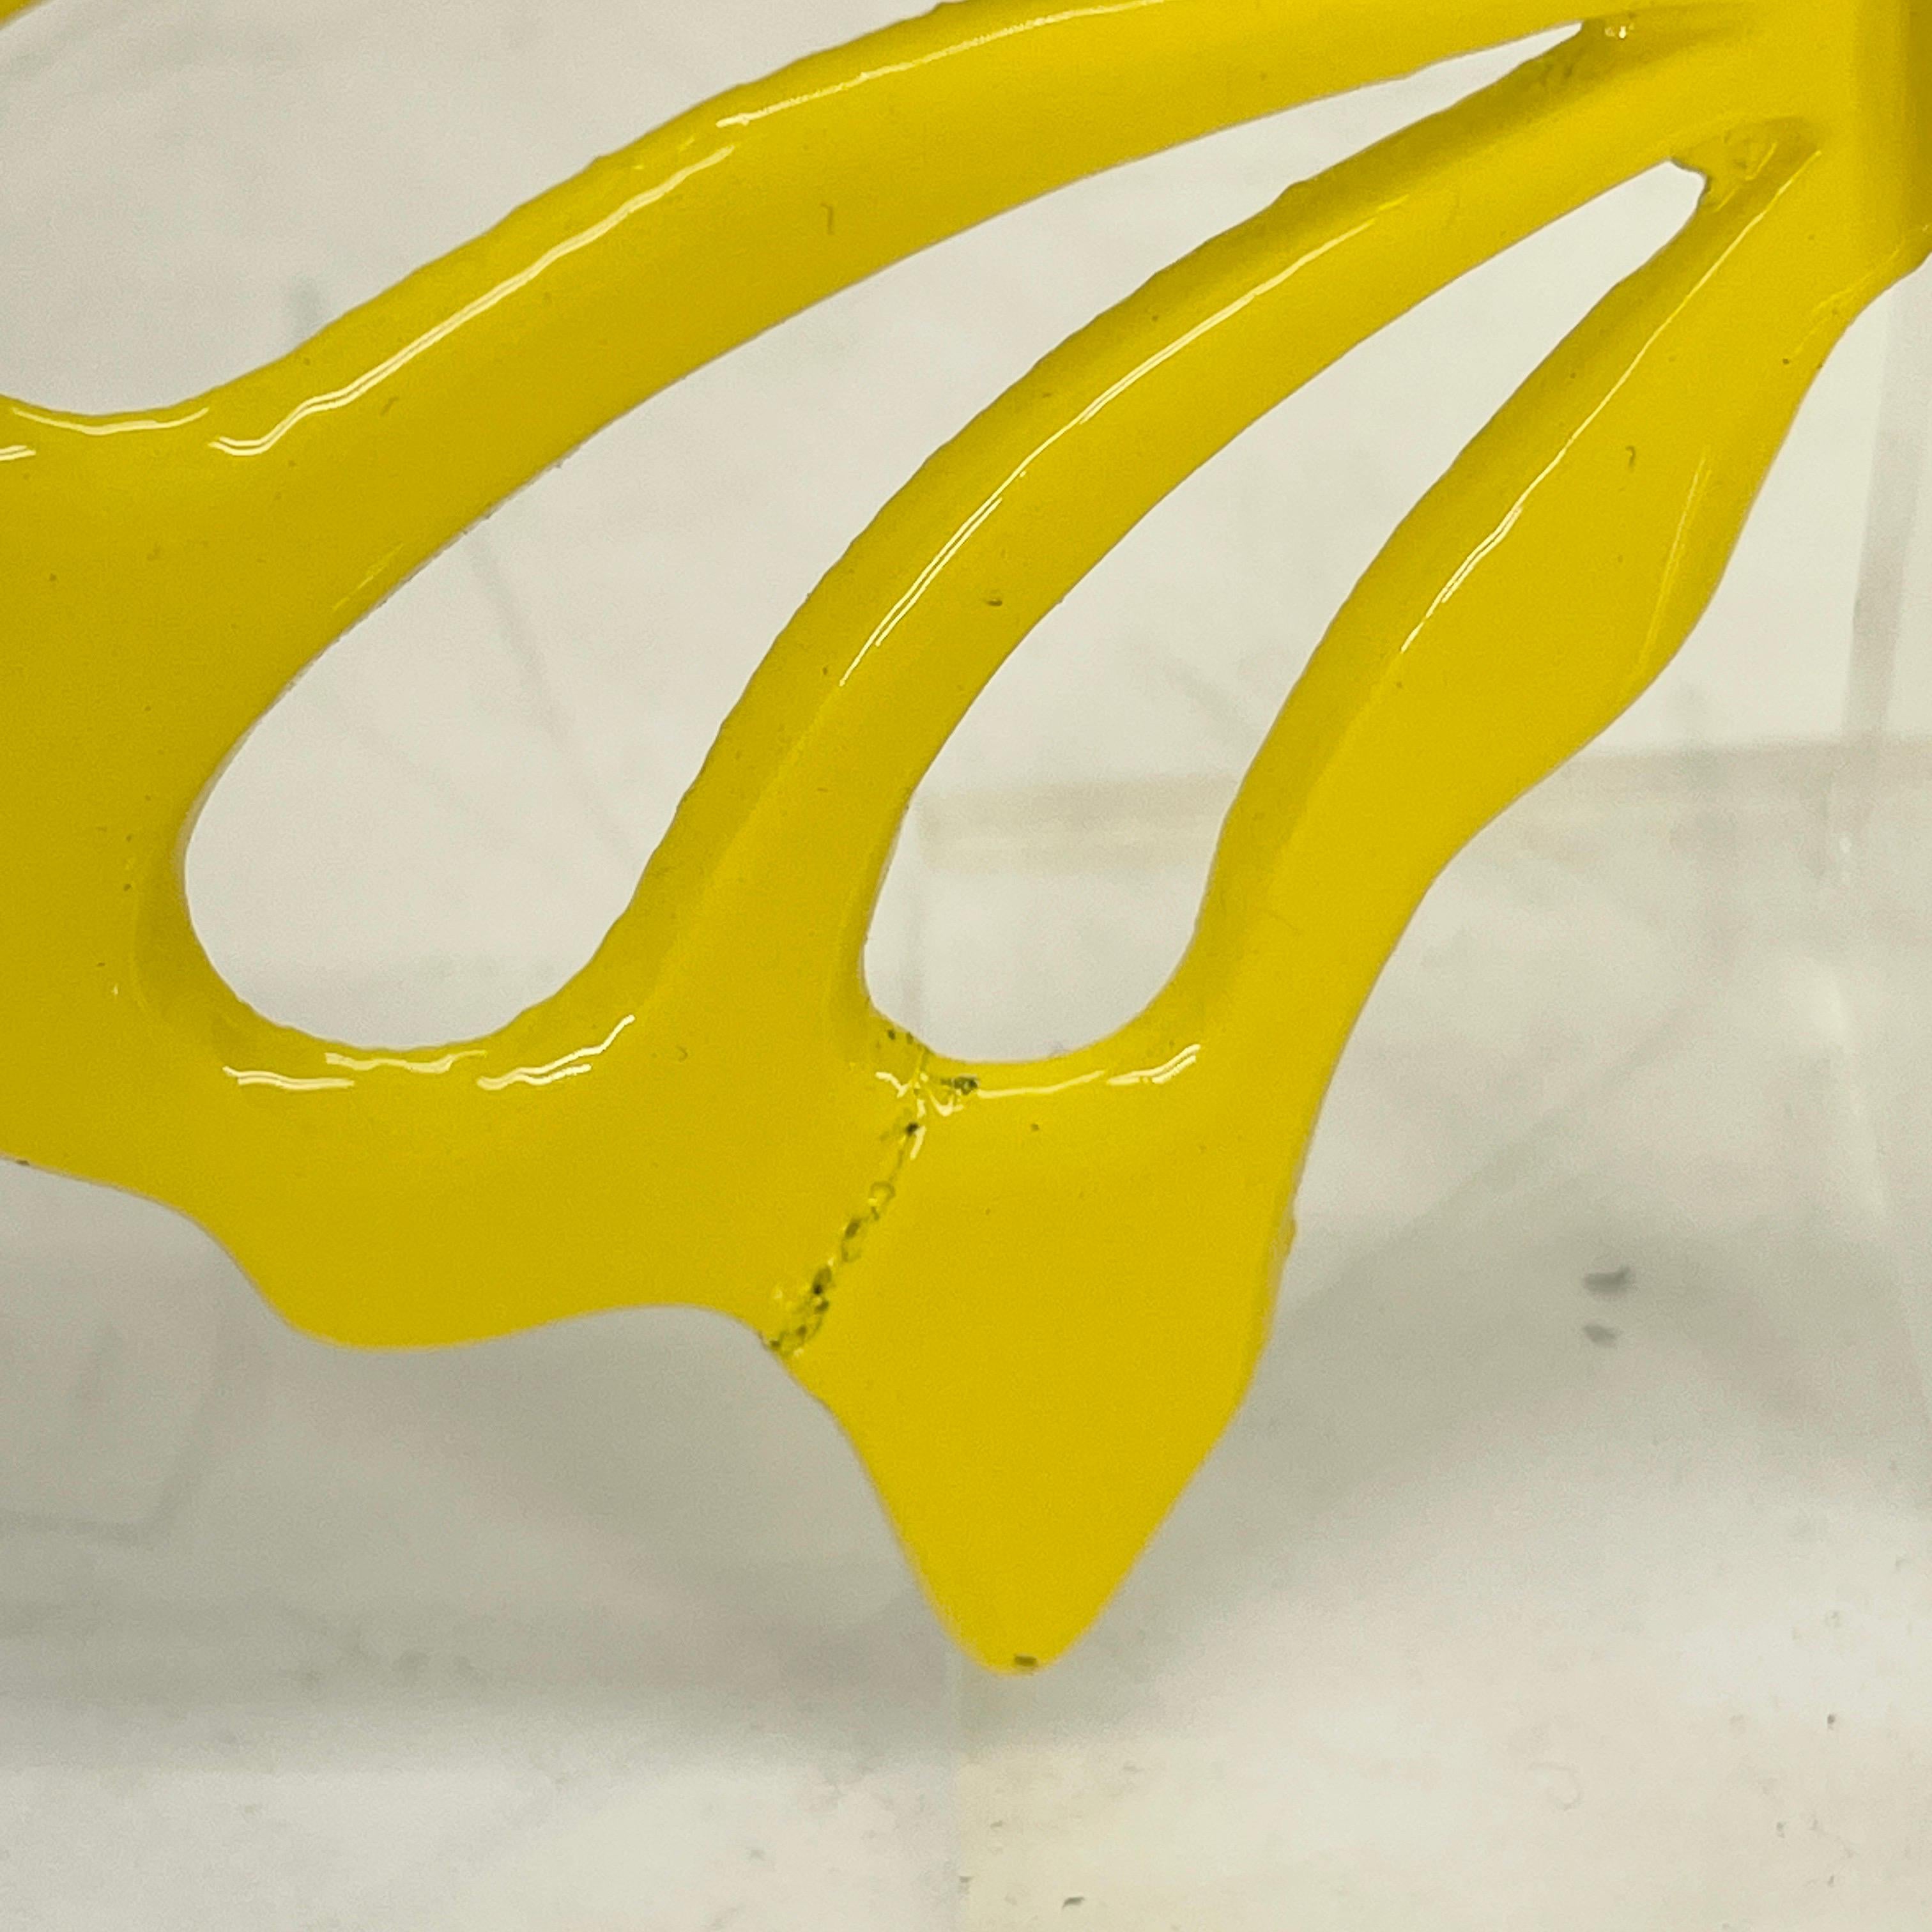 Large Brass Midcentury Butterfly Sculpture in Bright Yellow Powder-Coat For Sale 12